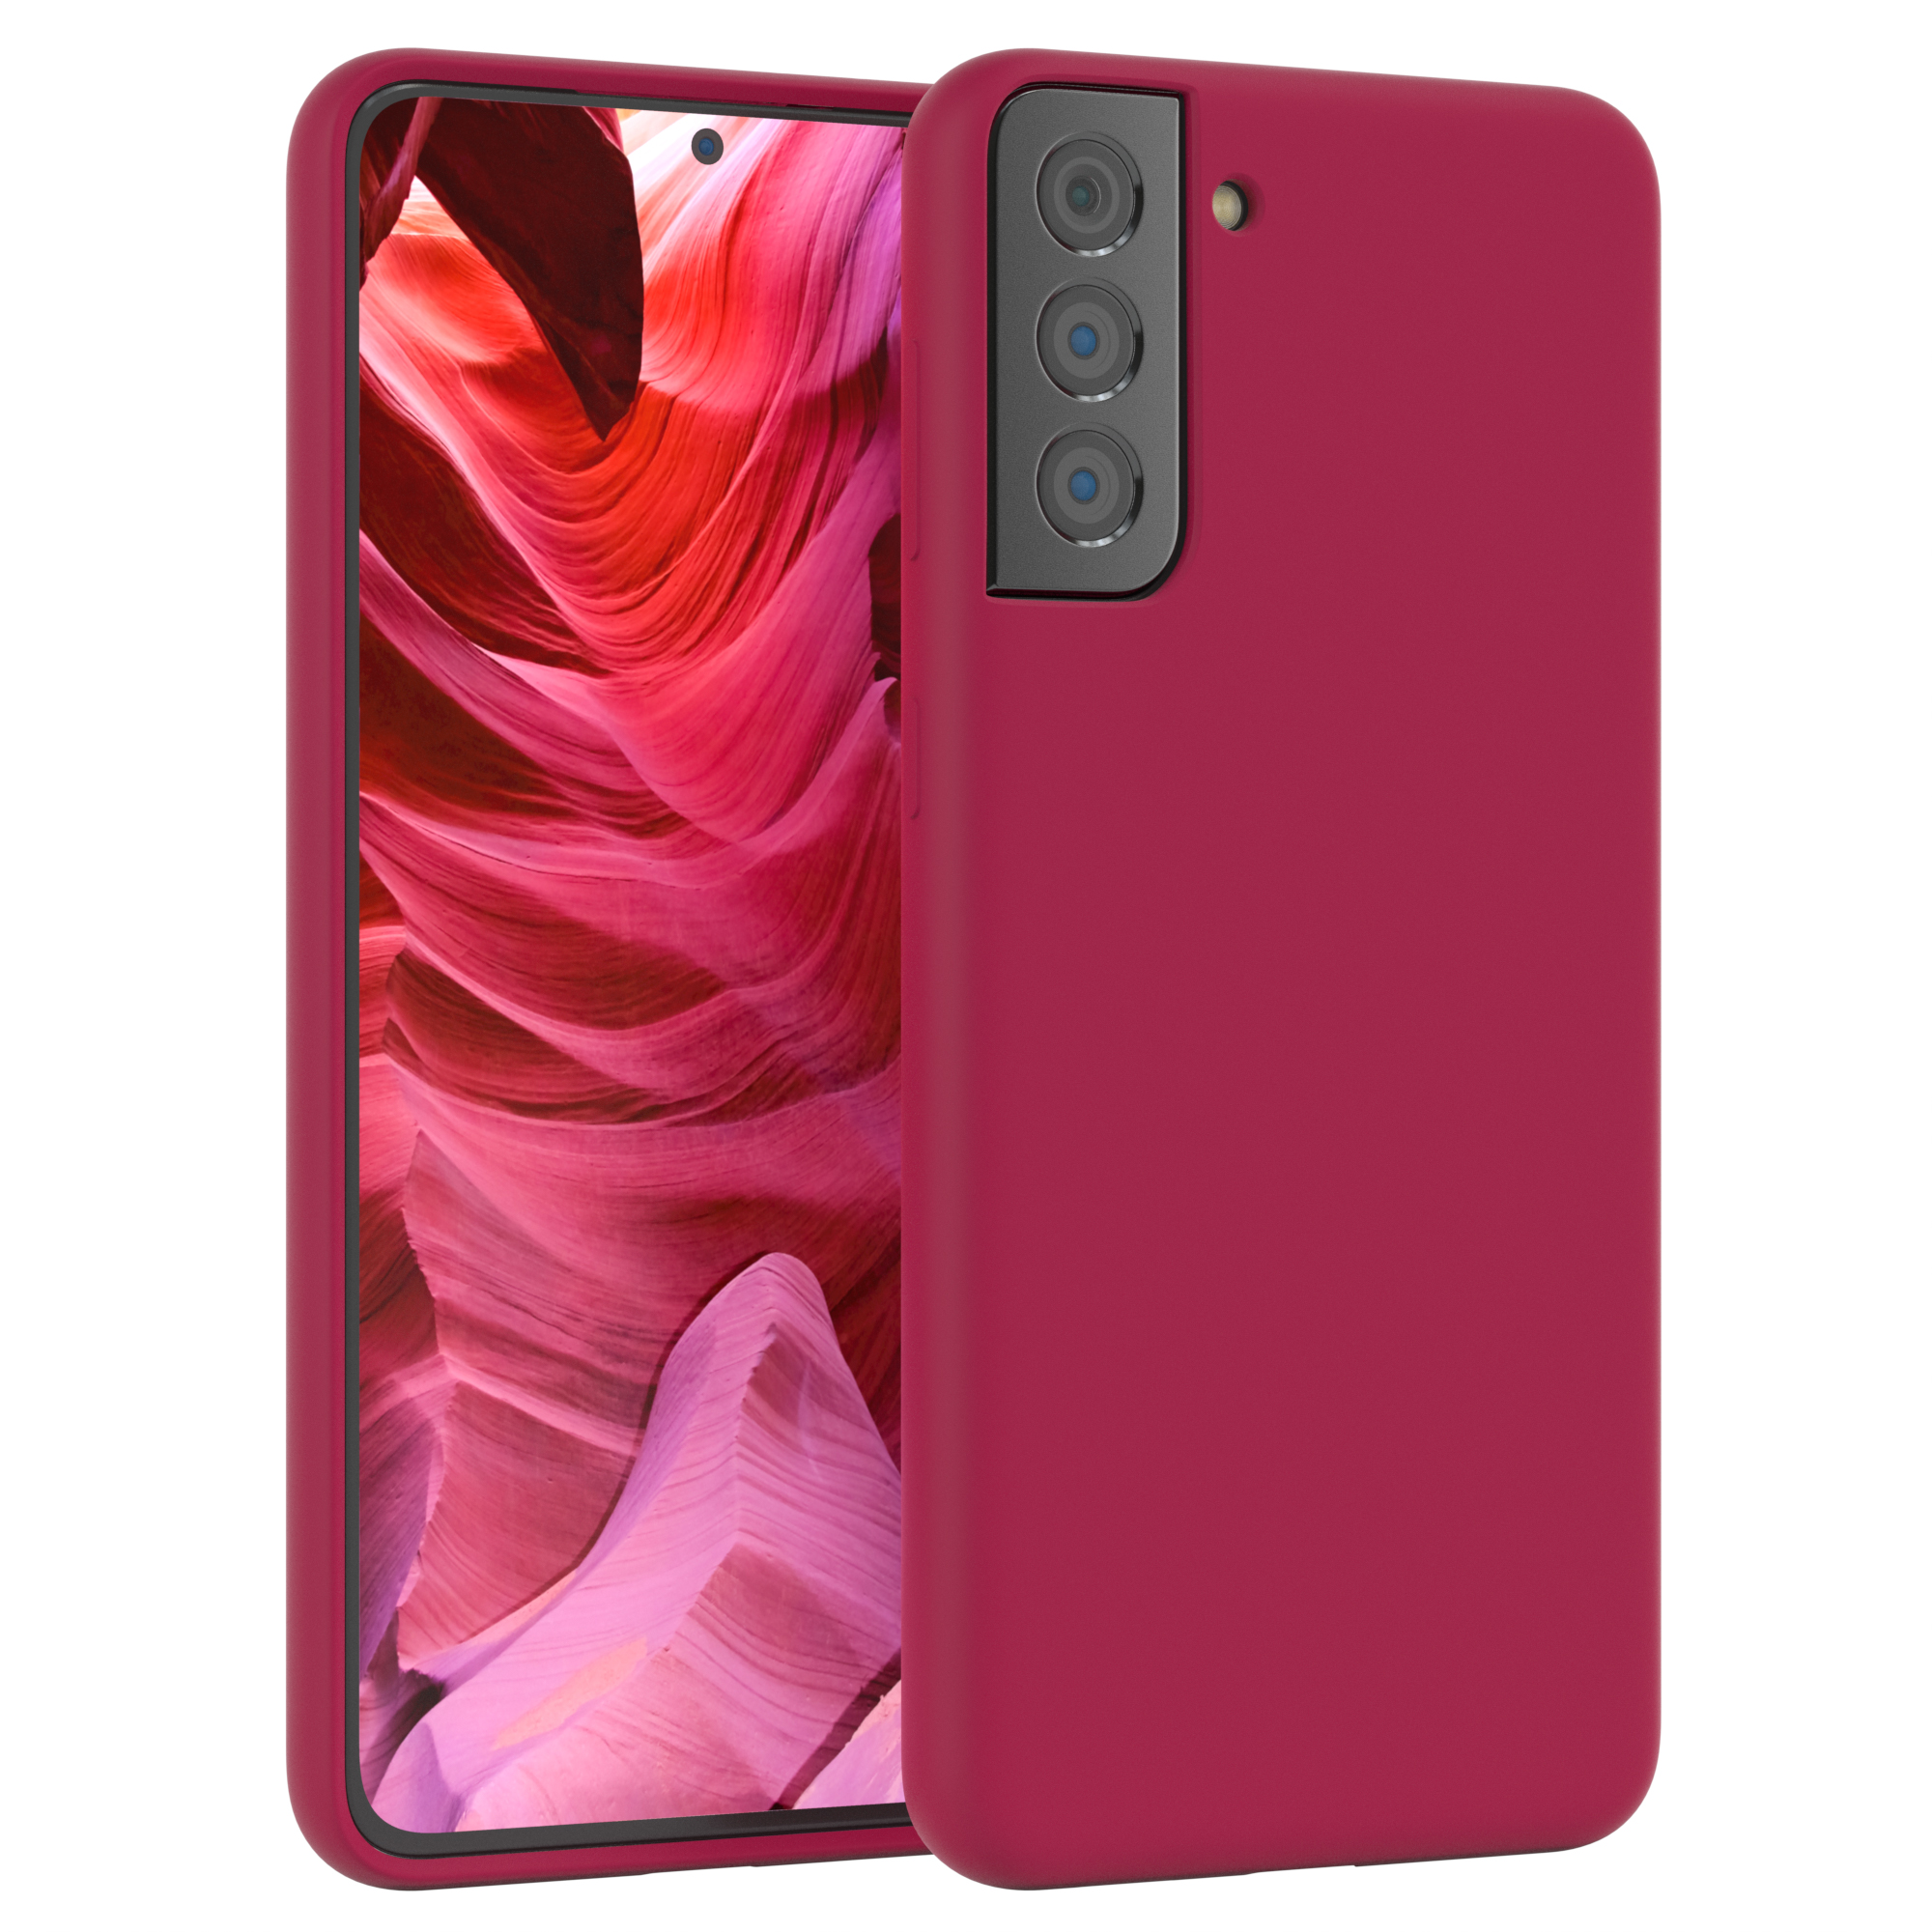 Rot Plus S21 Premium Handycase, Galaxy Beere EAZY / CASE 5G, Samsung, Backcover, Silikon